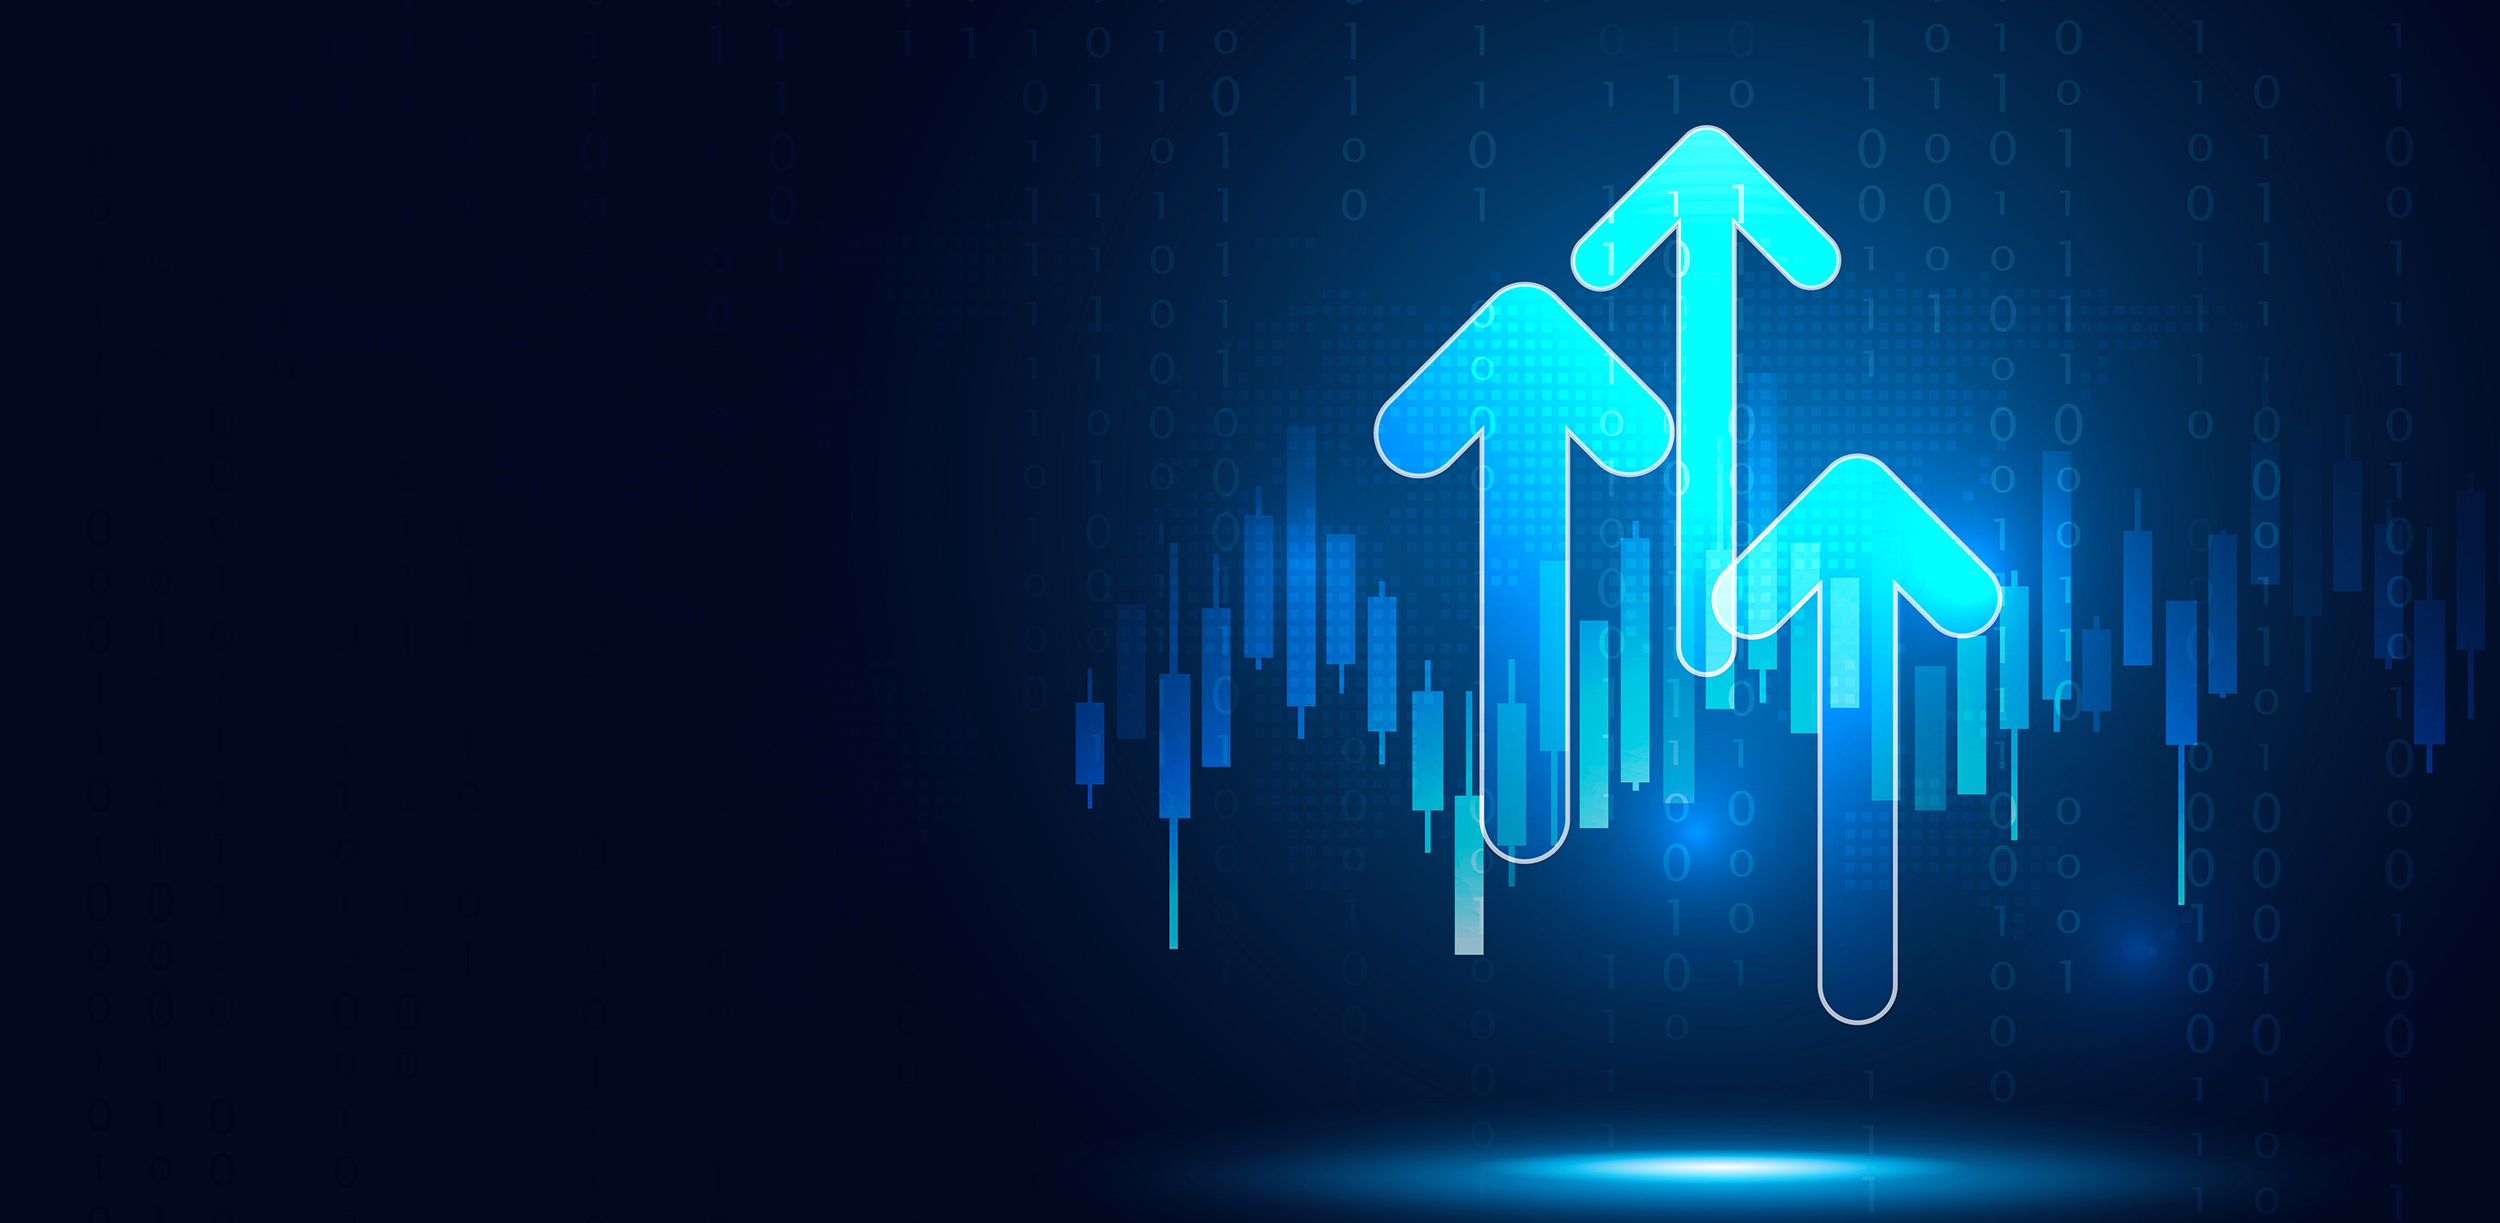 Futuristic raised triple-up arrow chart with candlesticks digital transformation abstract technology background. Big data and business growth currency stock and investment economy. Vector illustration